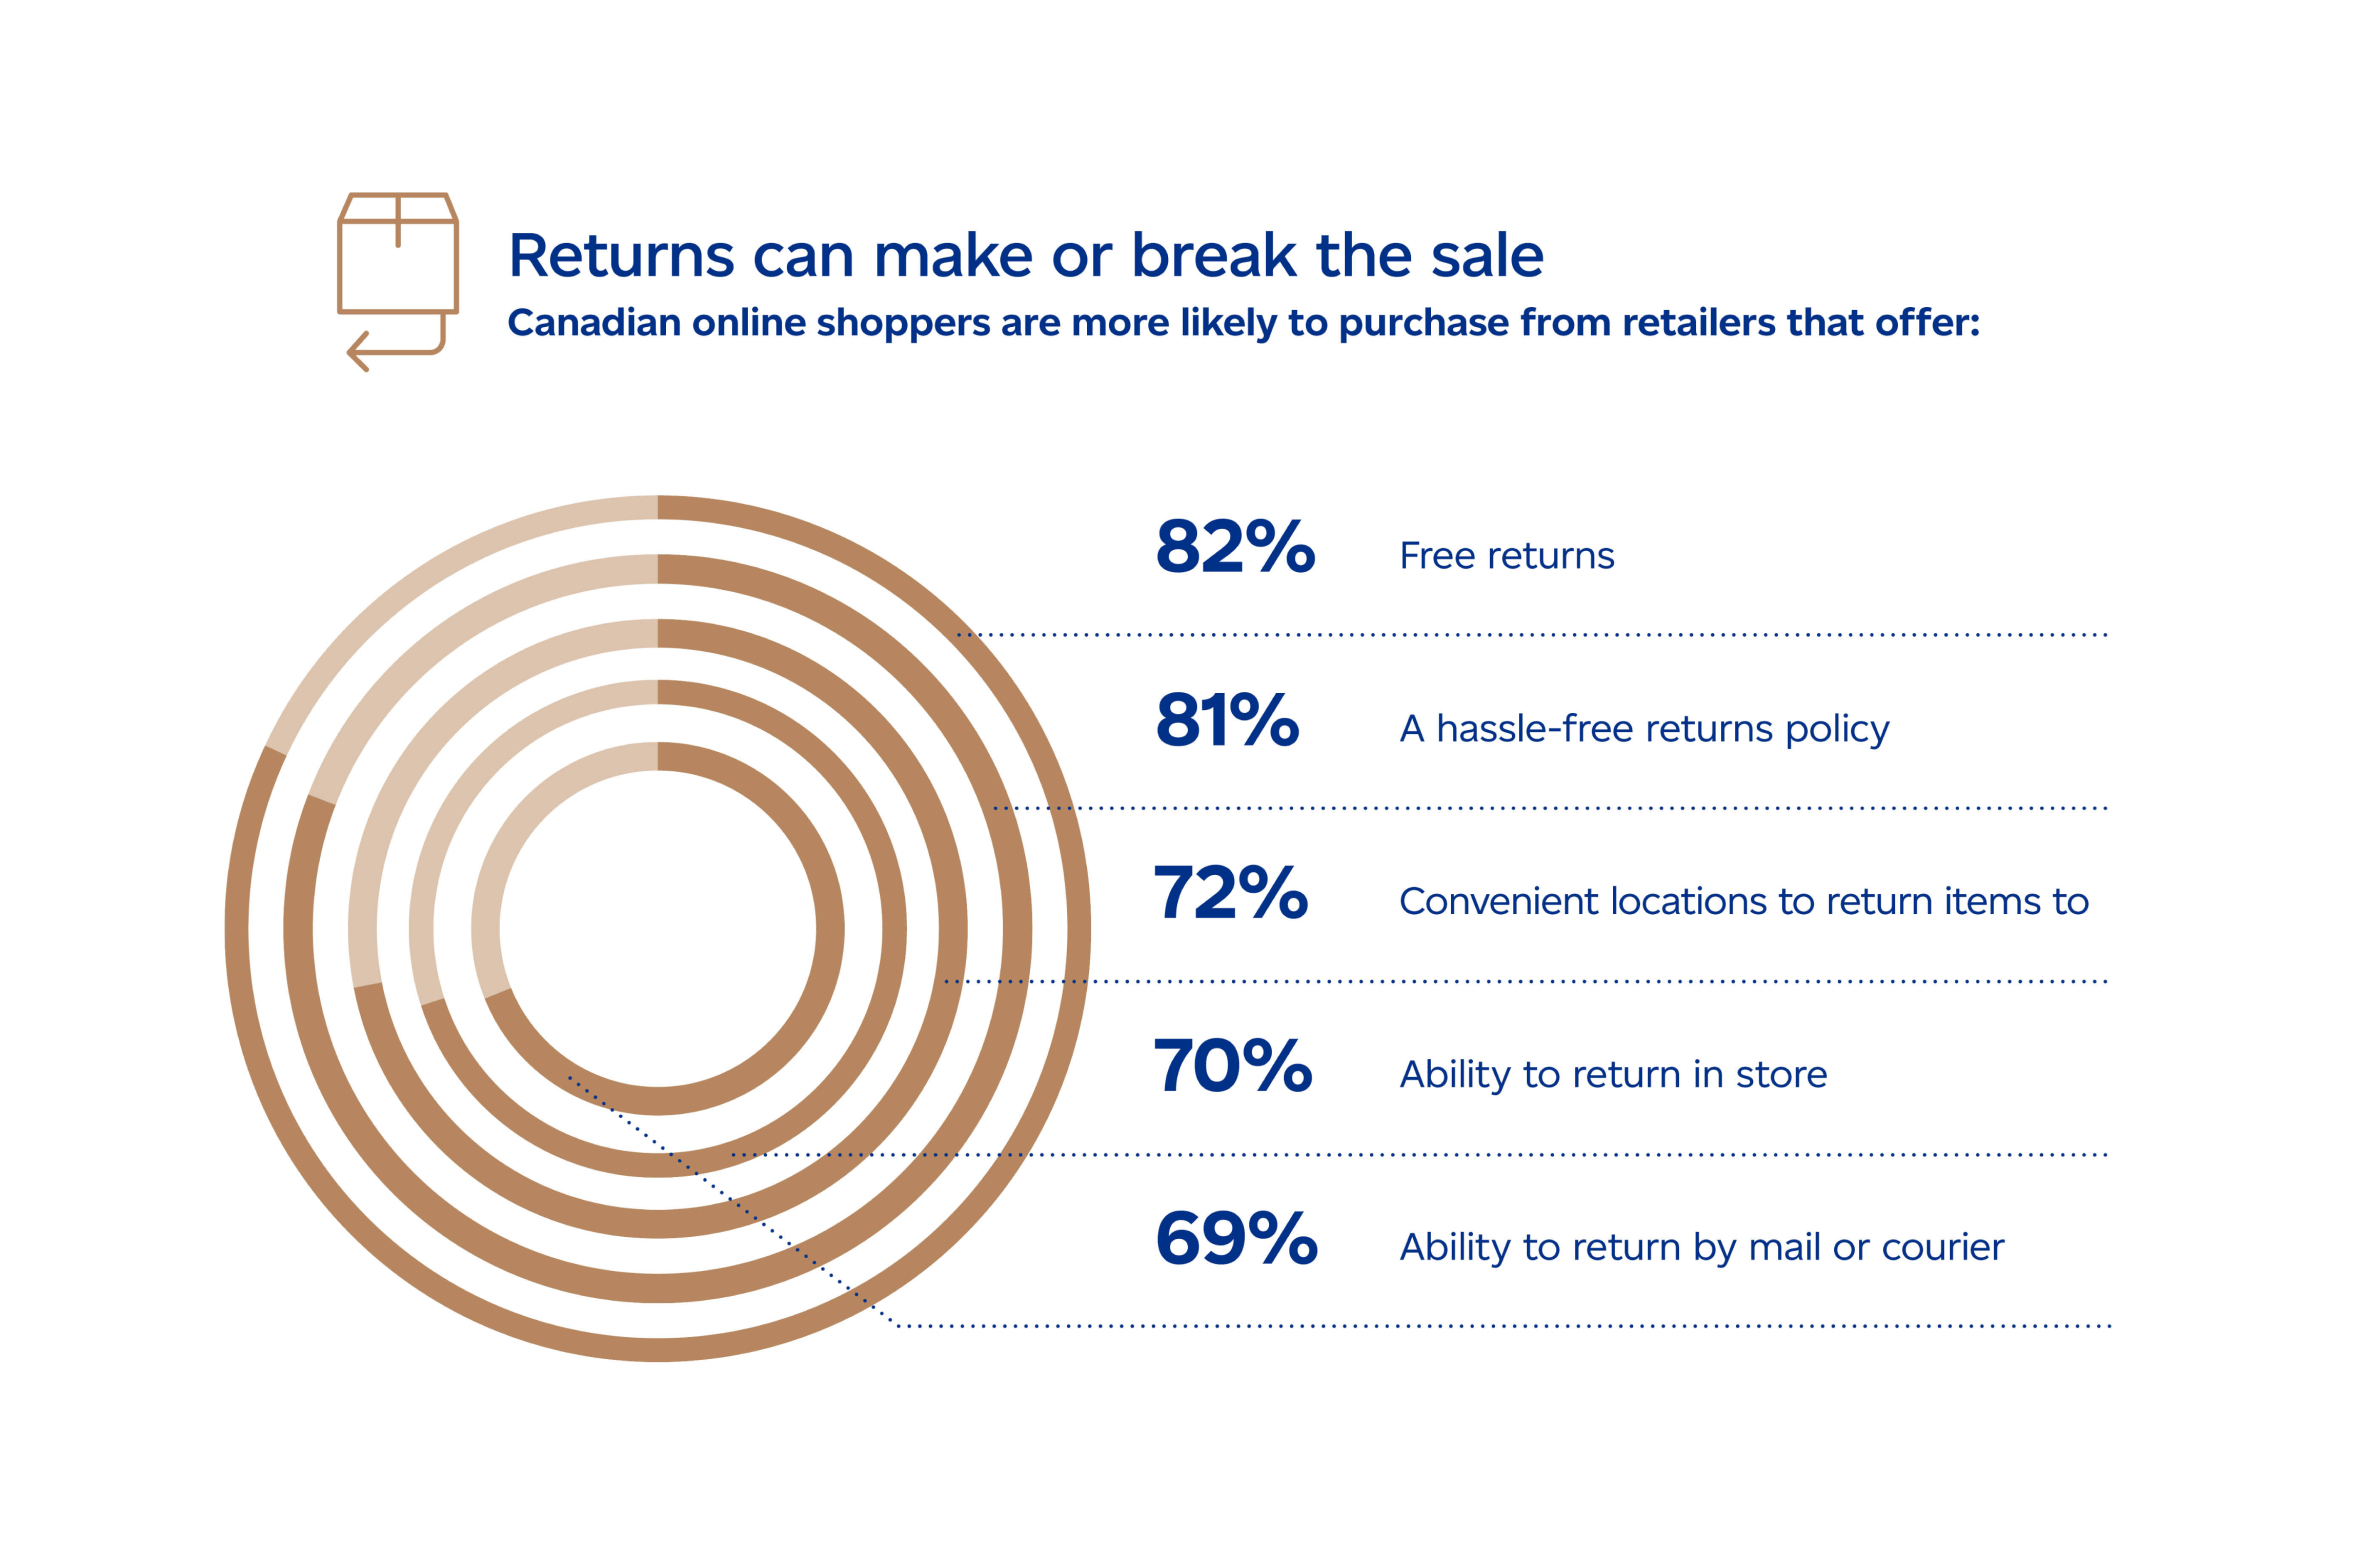 Returns can make or break the sale. Canadian online shoppers are more likely to purchase from retailers that offer: free returns 82%, a hassle-free returns policy 81%, convenient locations to return items to 72%, ability to return in store 70%, ability to return by mail or courier 69%.